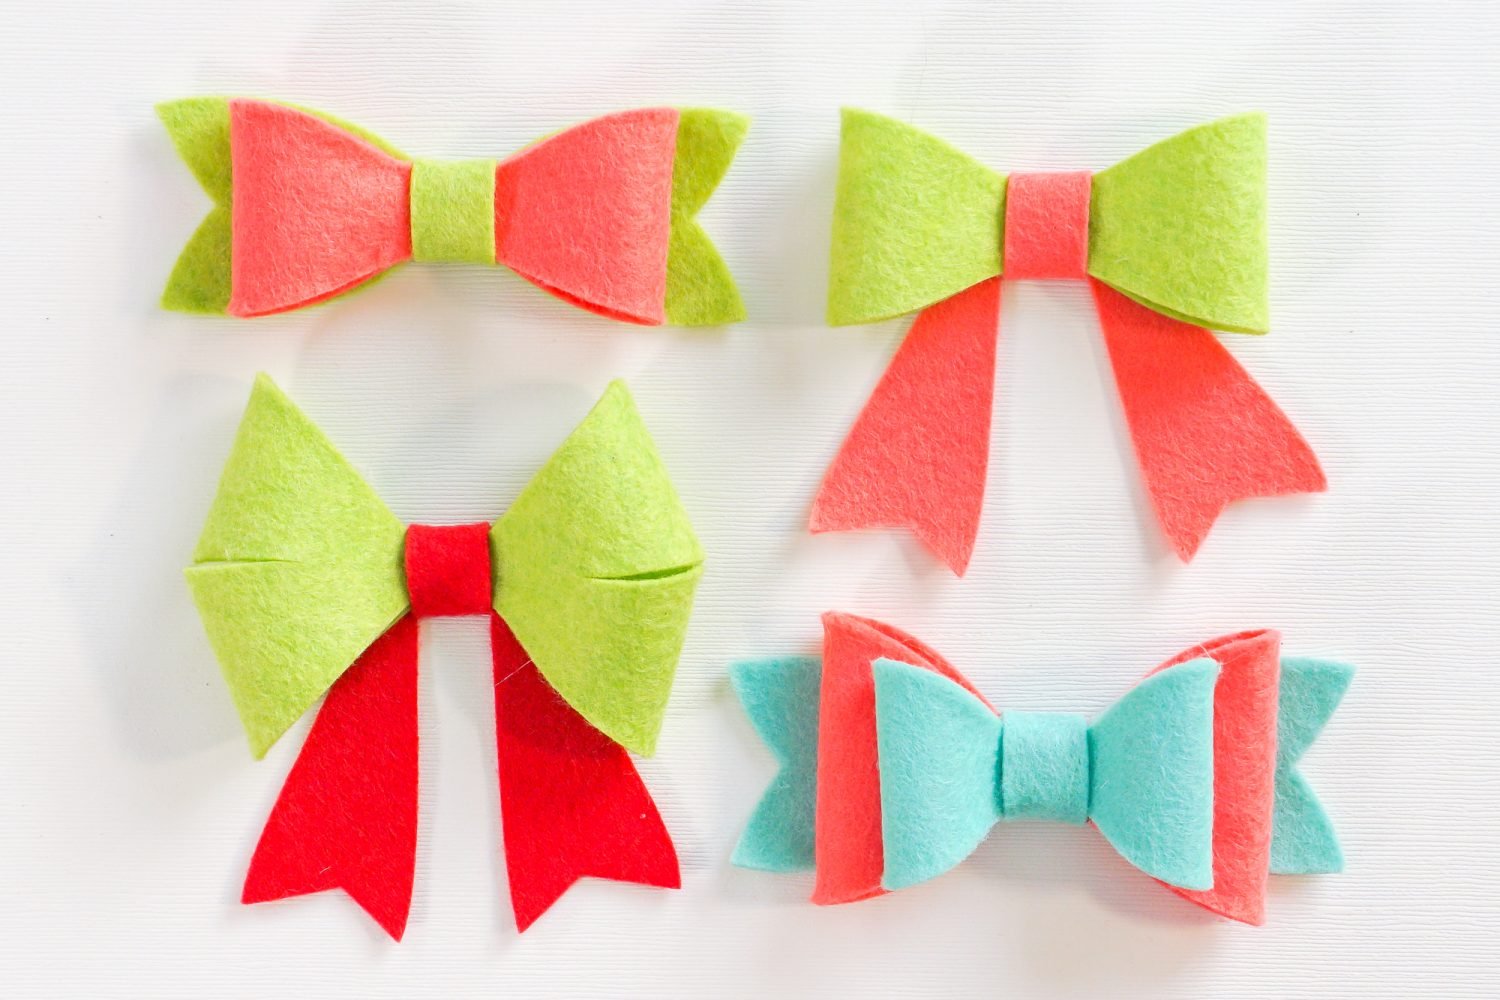 Close up picture of felt bows assembled in aqua/red combination and red/ green combinations.